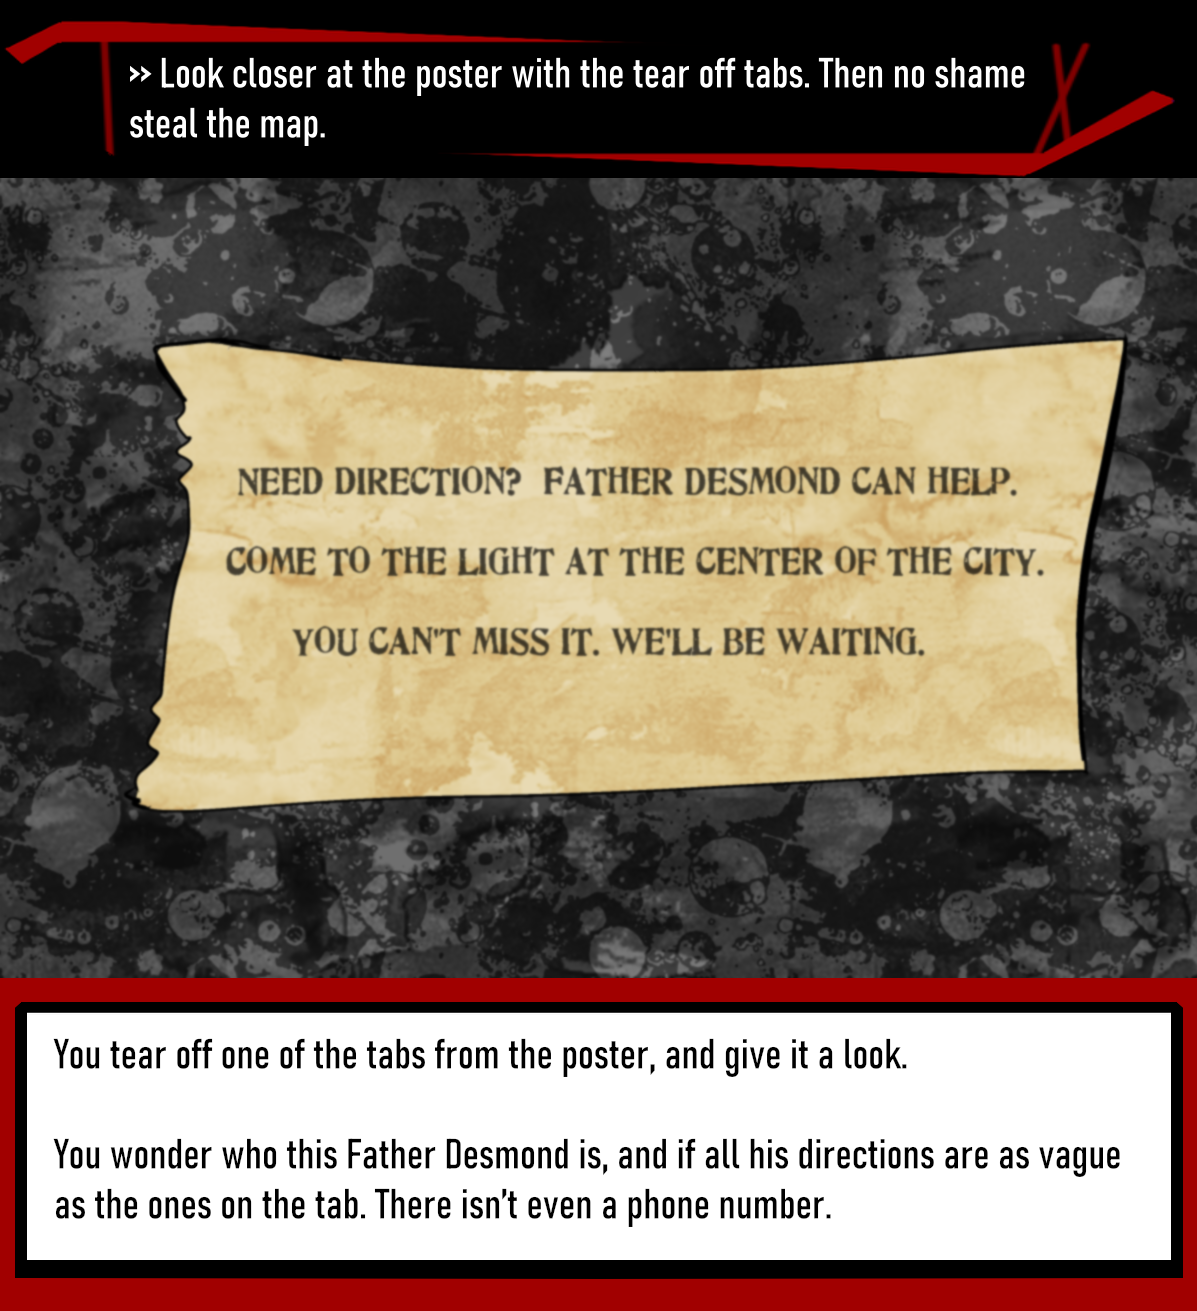 >> Look closer at the poster with the tear off tabs. Then no shame steal the map.
You tear off one of the tabs from the poster, and give it a look. 
You wonder who this Father Desmond is, and if all his directions are as vague as the ones on the tab. There isn’t even a phone number.
